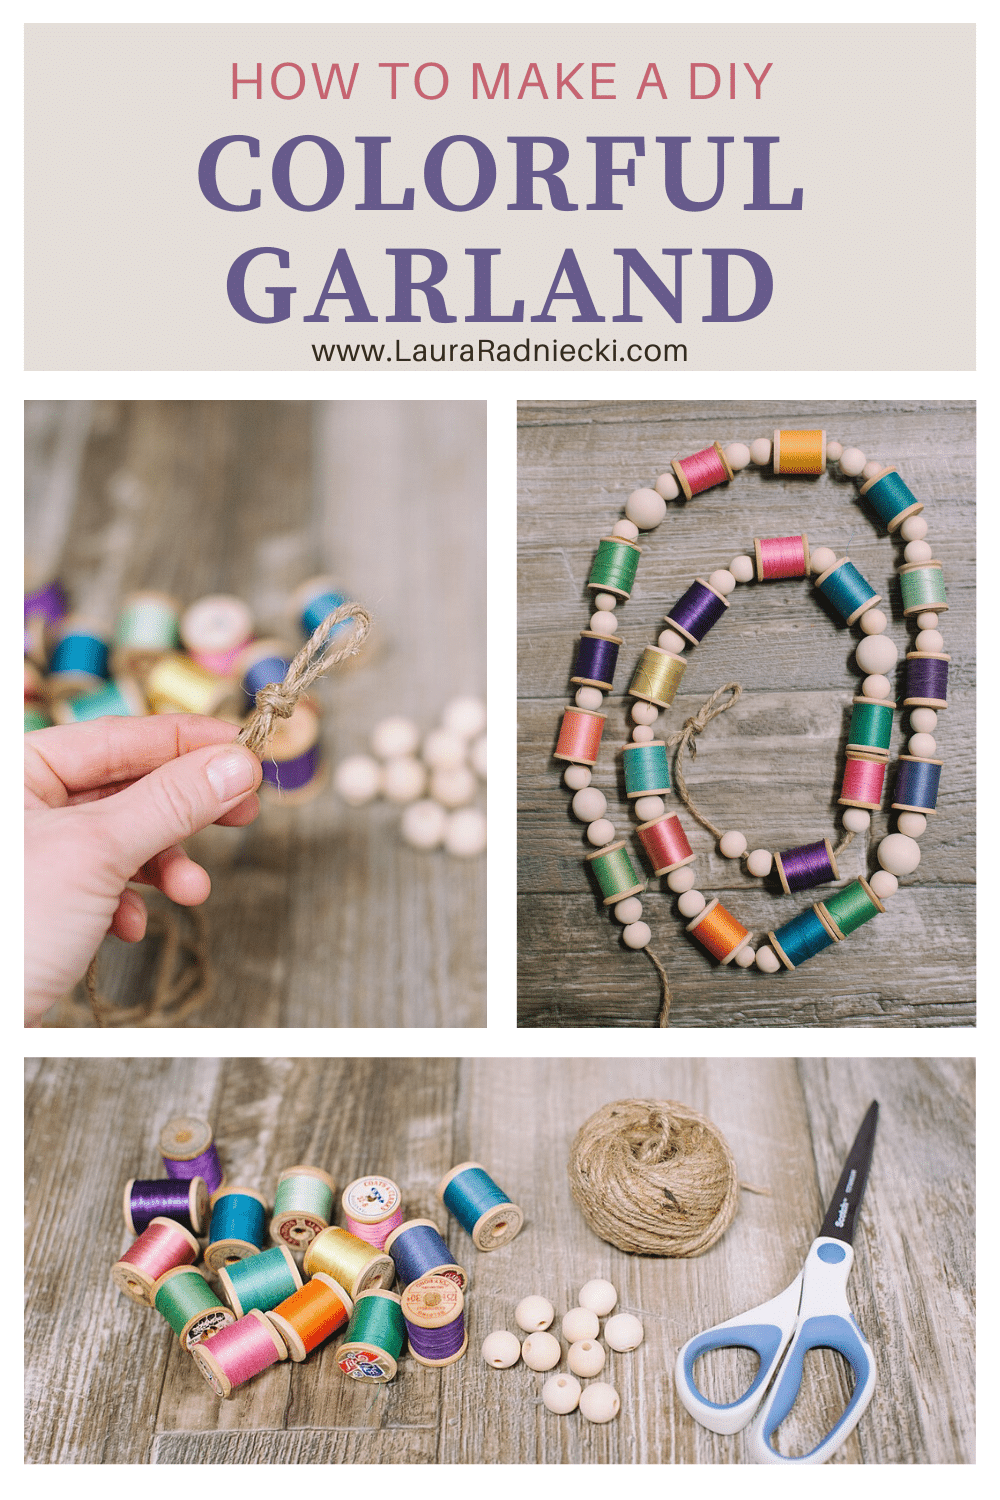 How to Make a DIY Colorful Garland using Wood Beads and Vintage Wooden Thread Spools